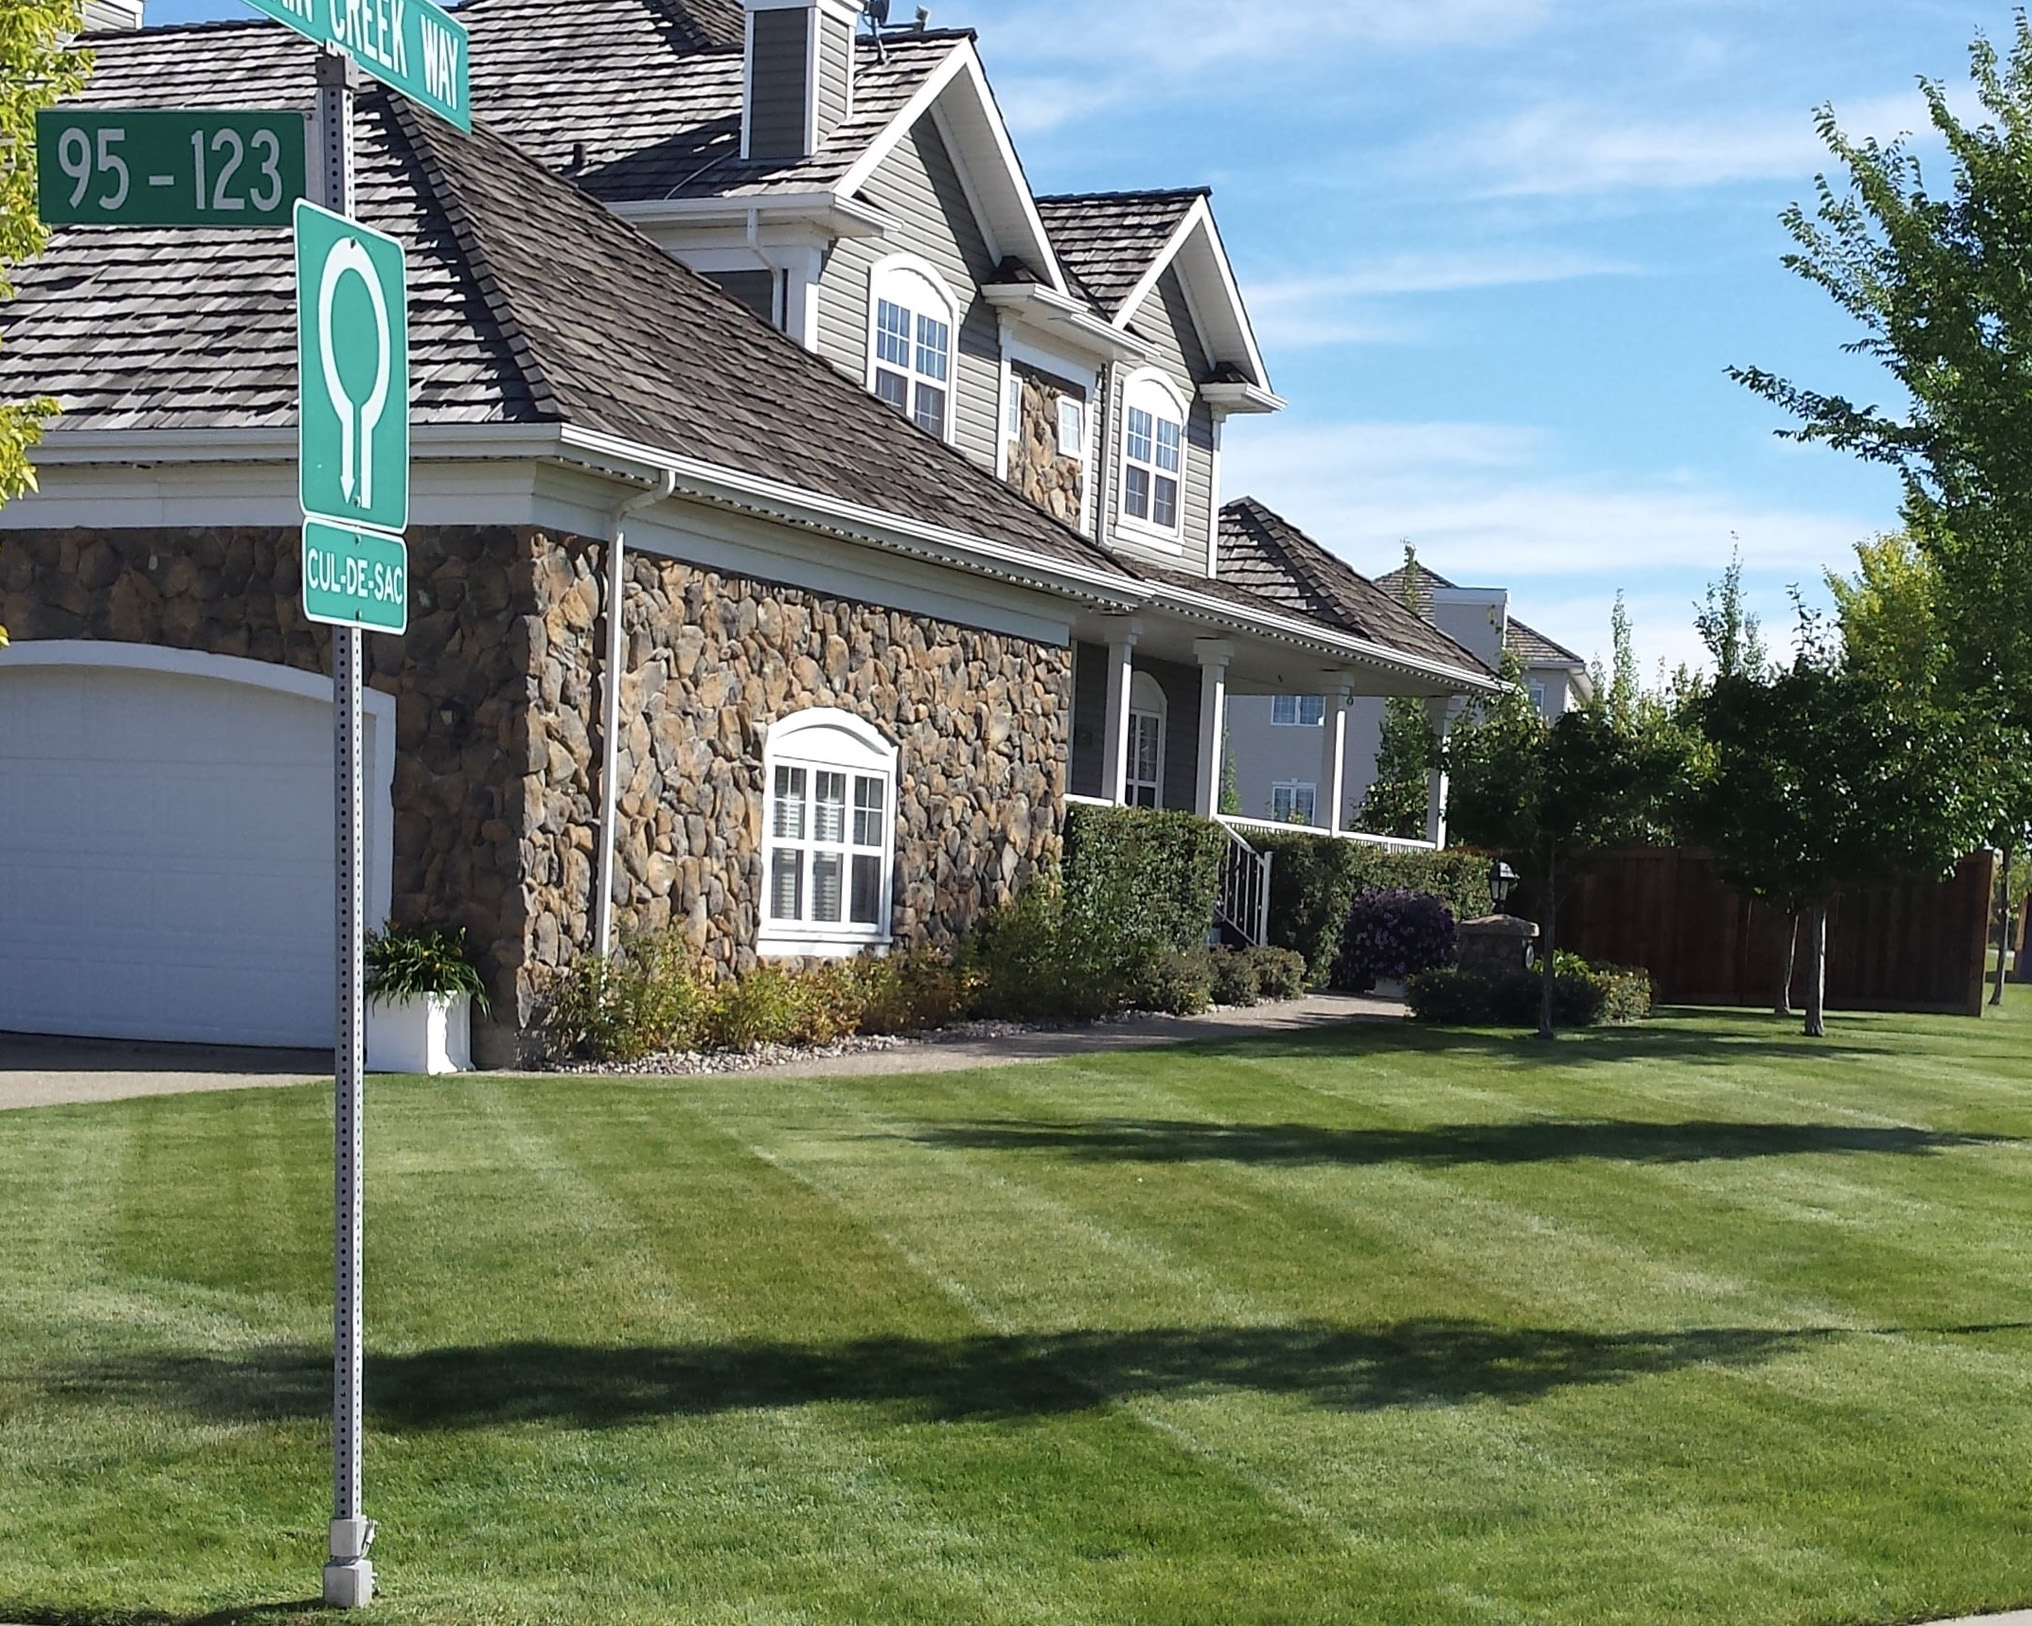 weekly lawn care services in calgary area